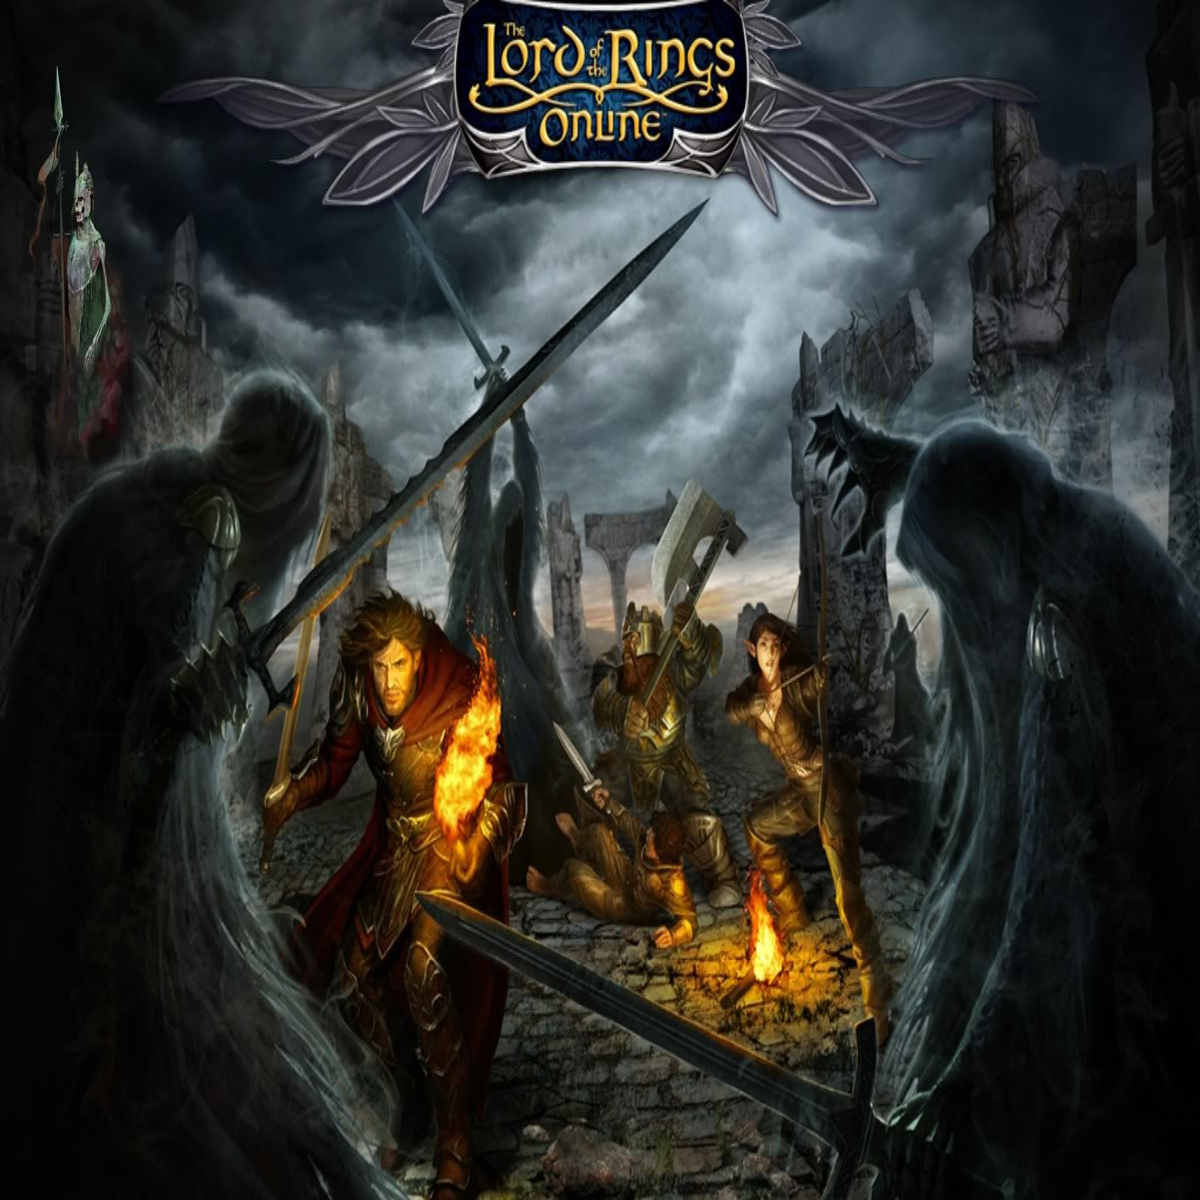 Lord of the Rings Online in 2021 